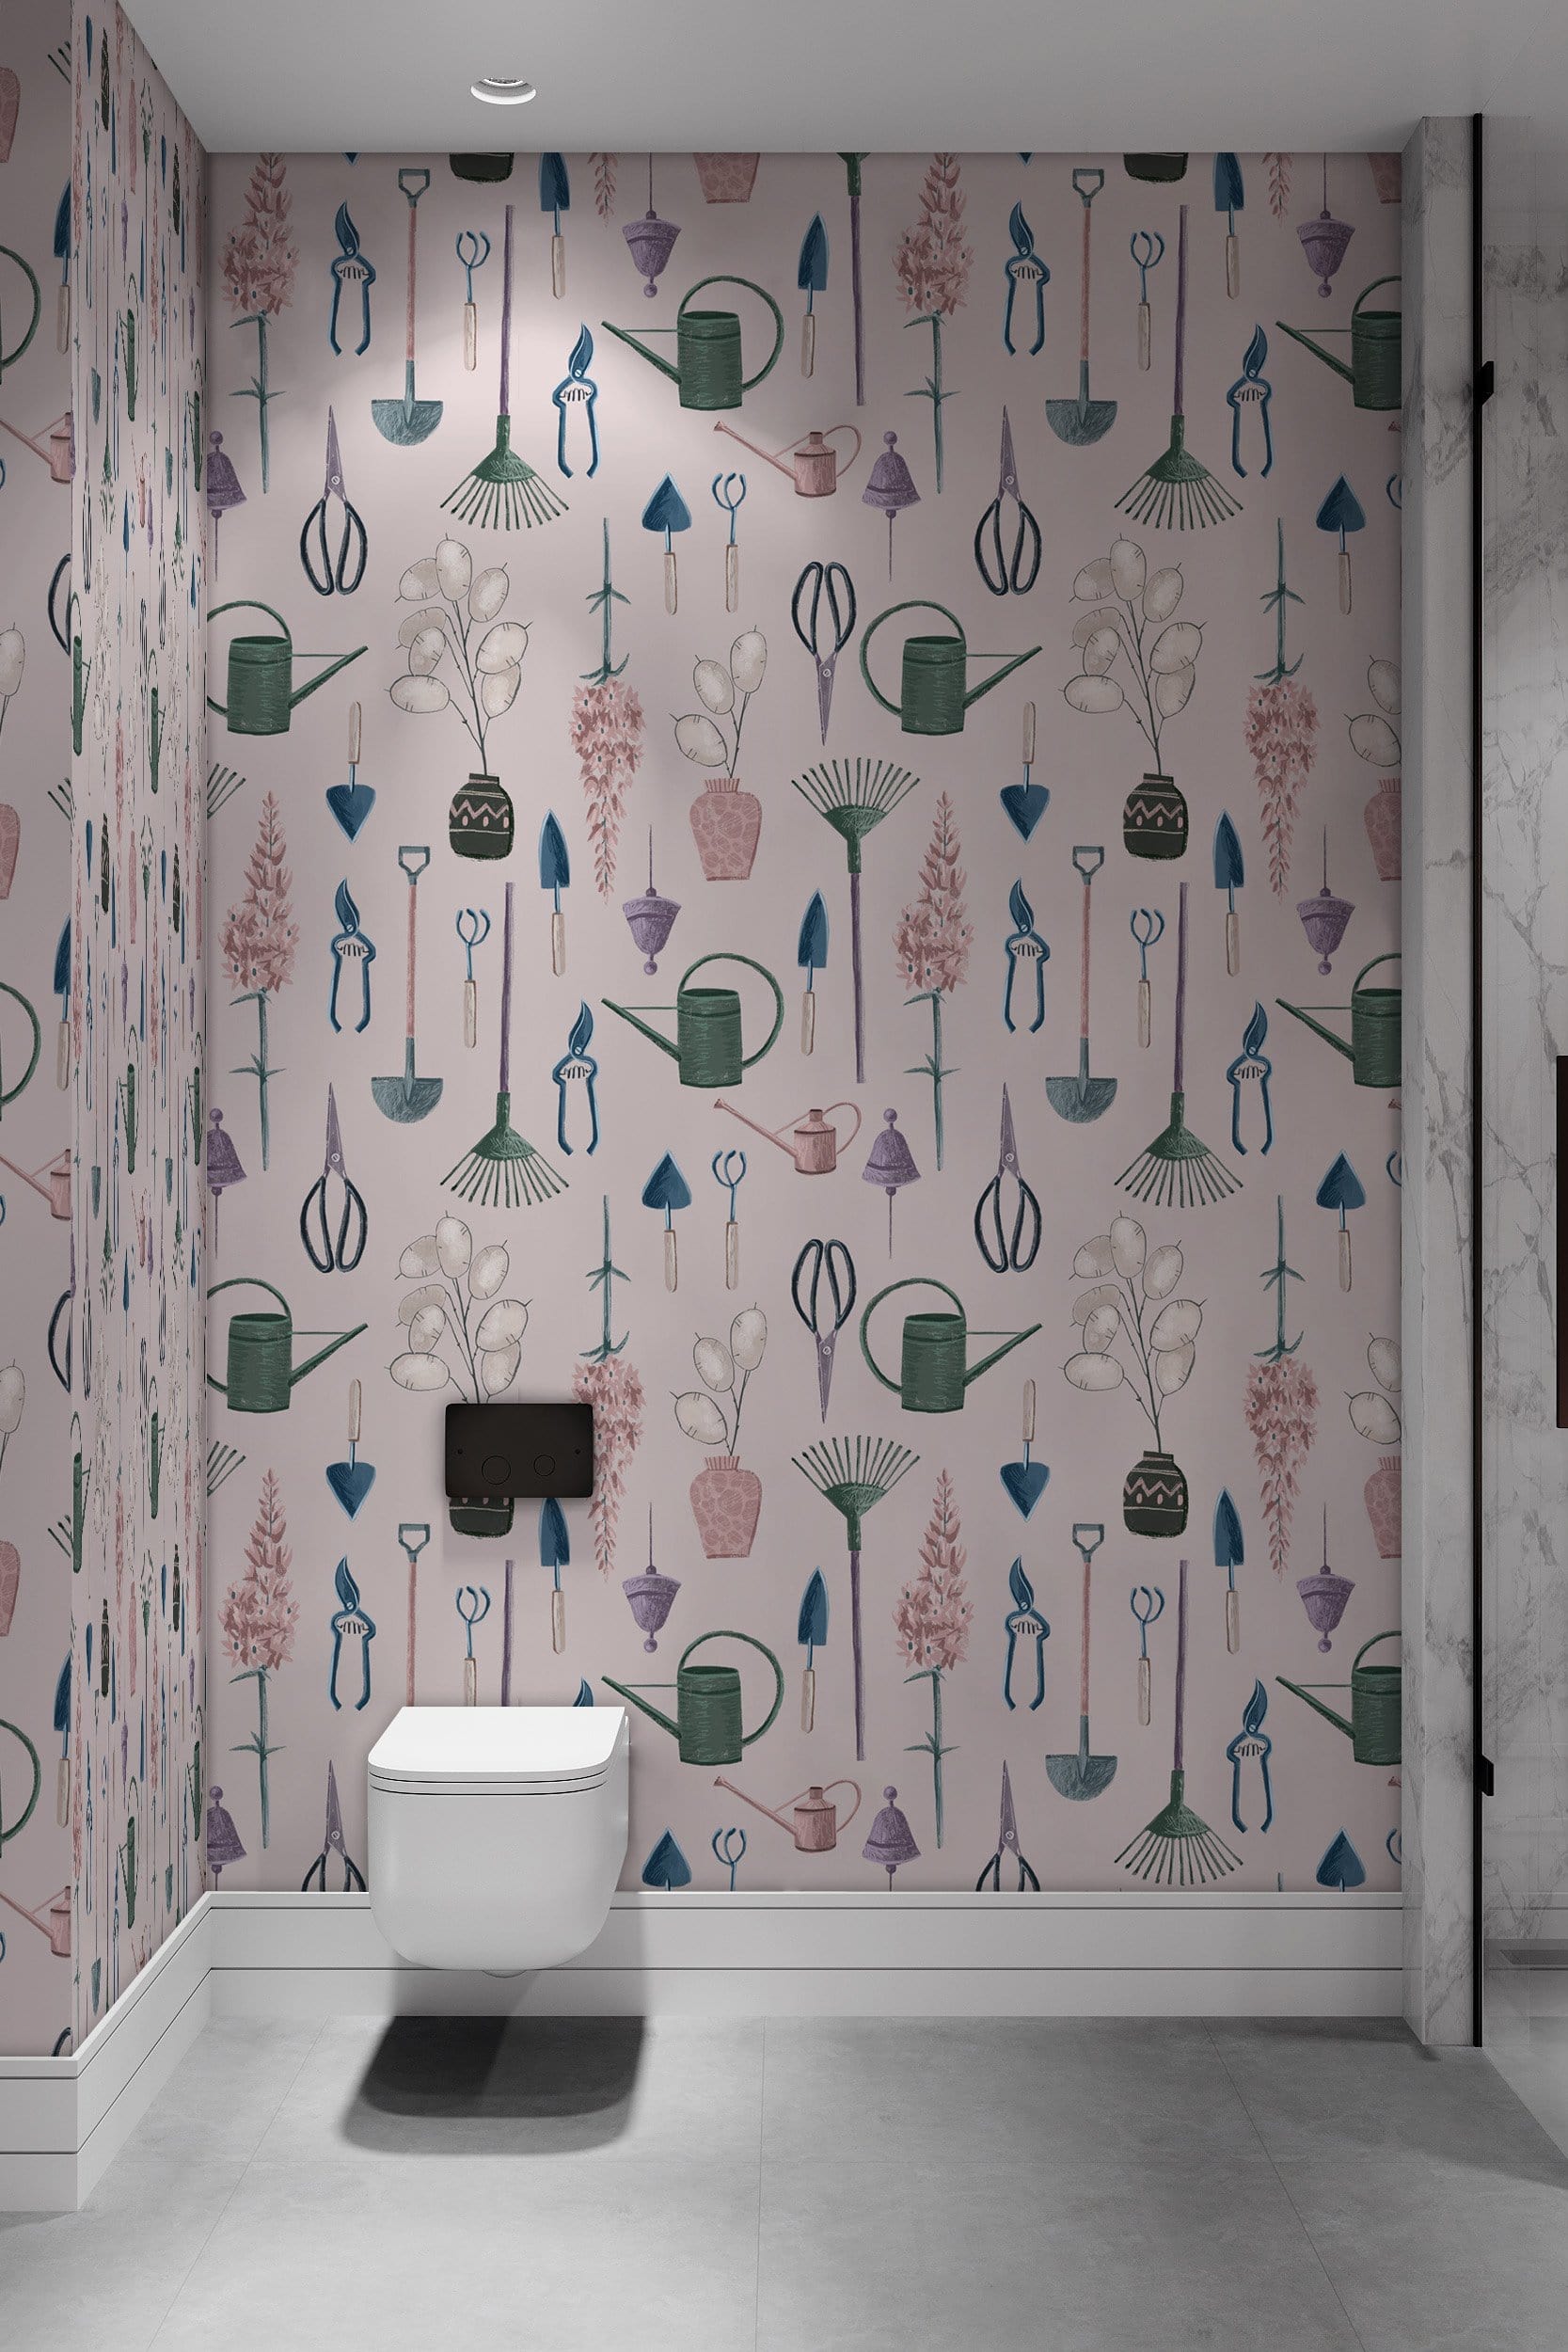 Wallpaper mural for the bathroom with a flower and tools design.